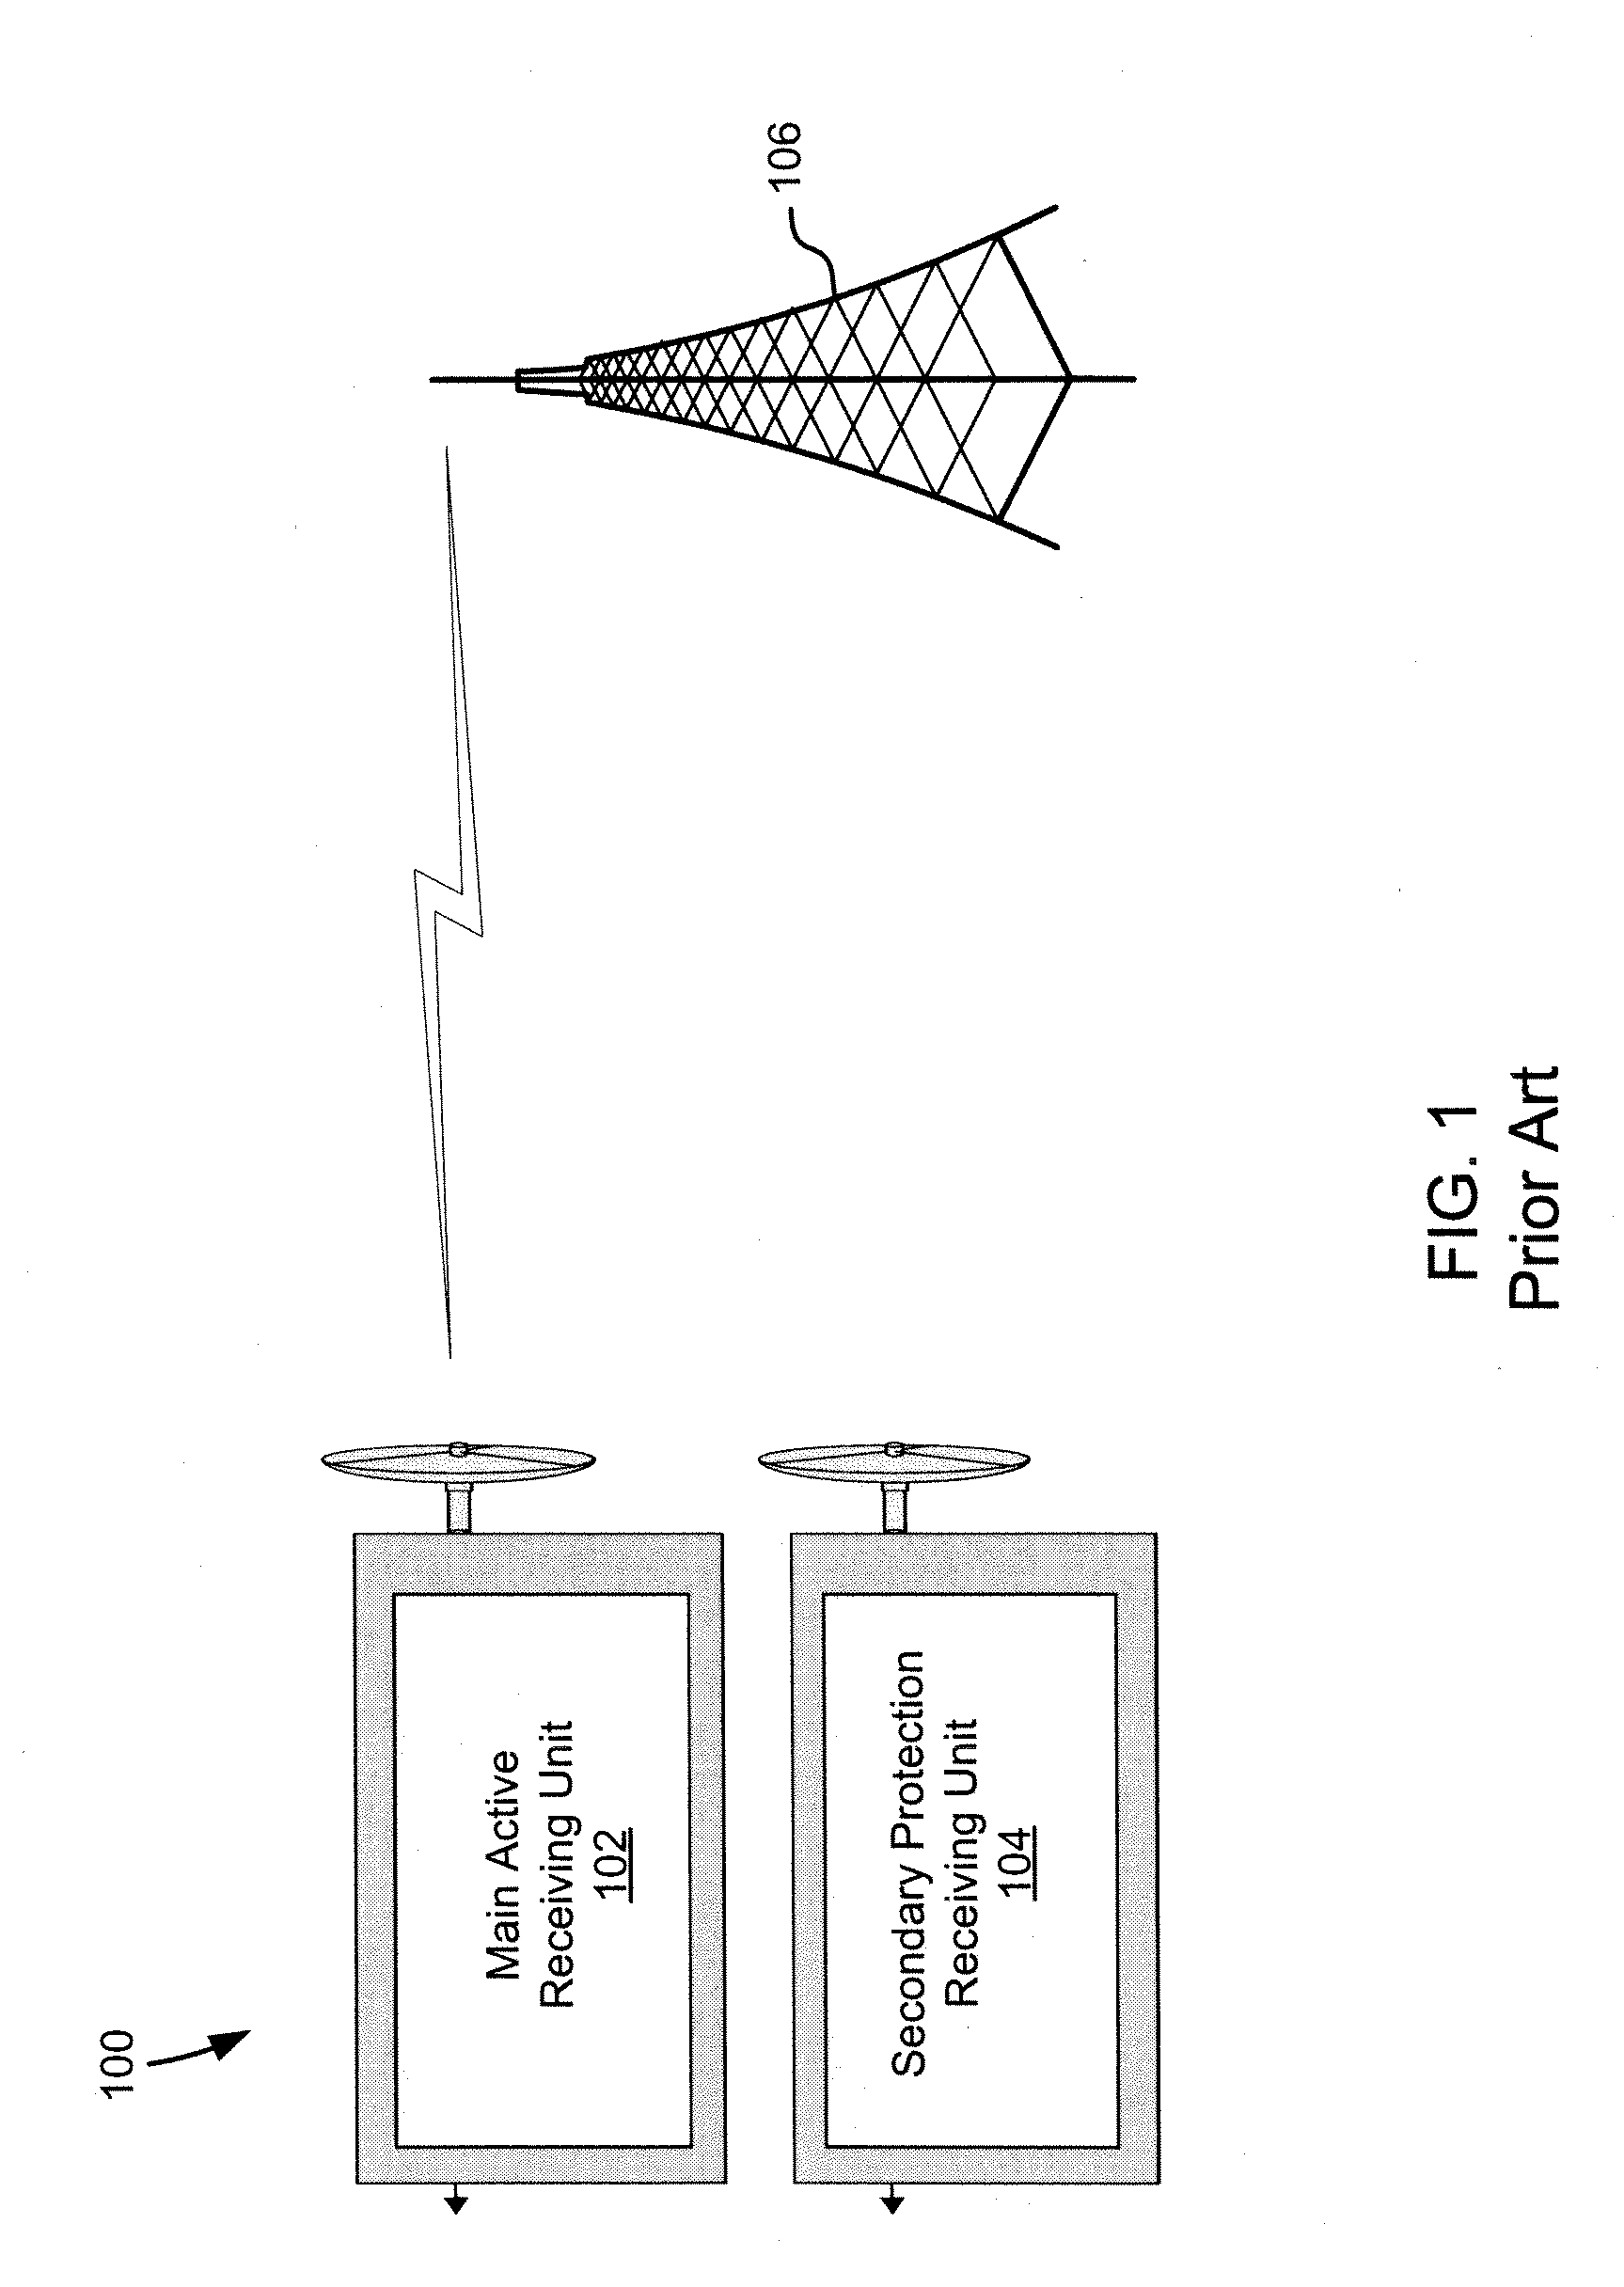 Systems and methods for combining signals from multiple active wireless receivers